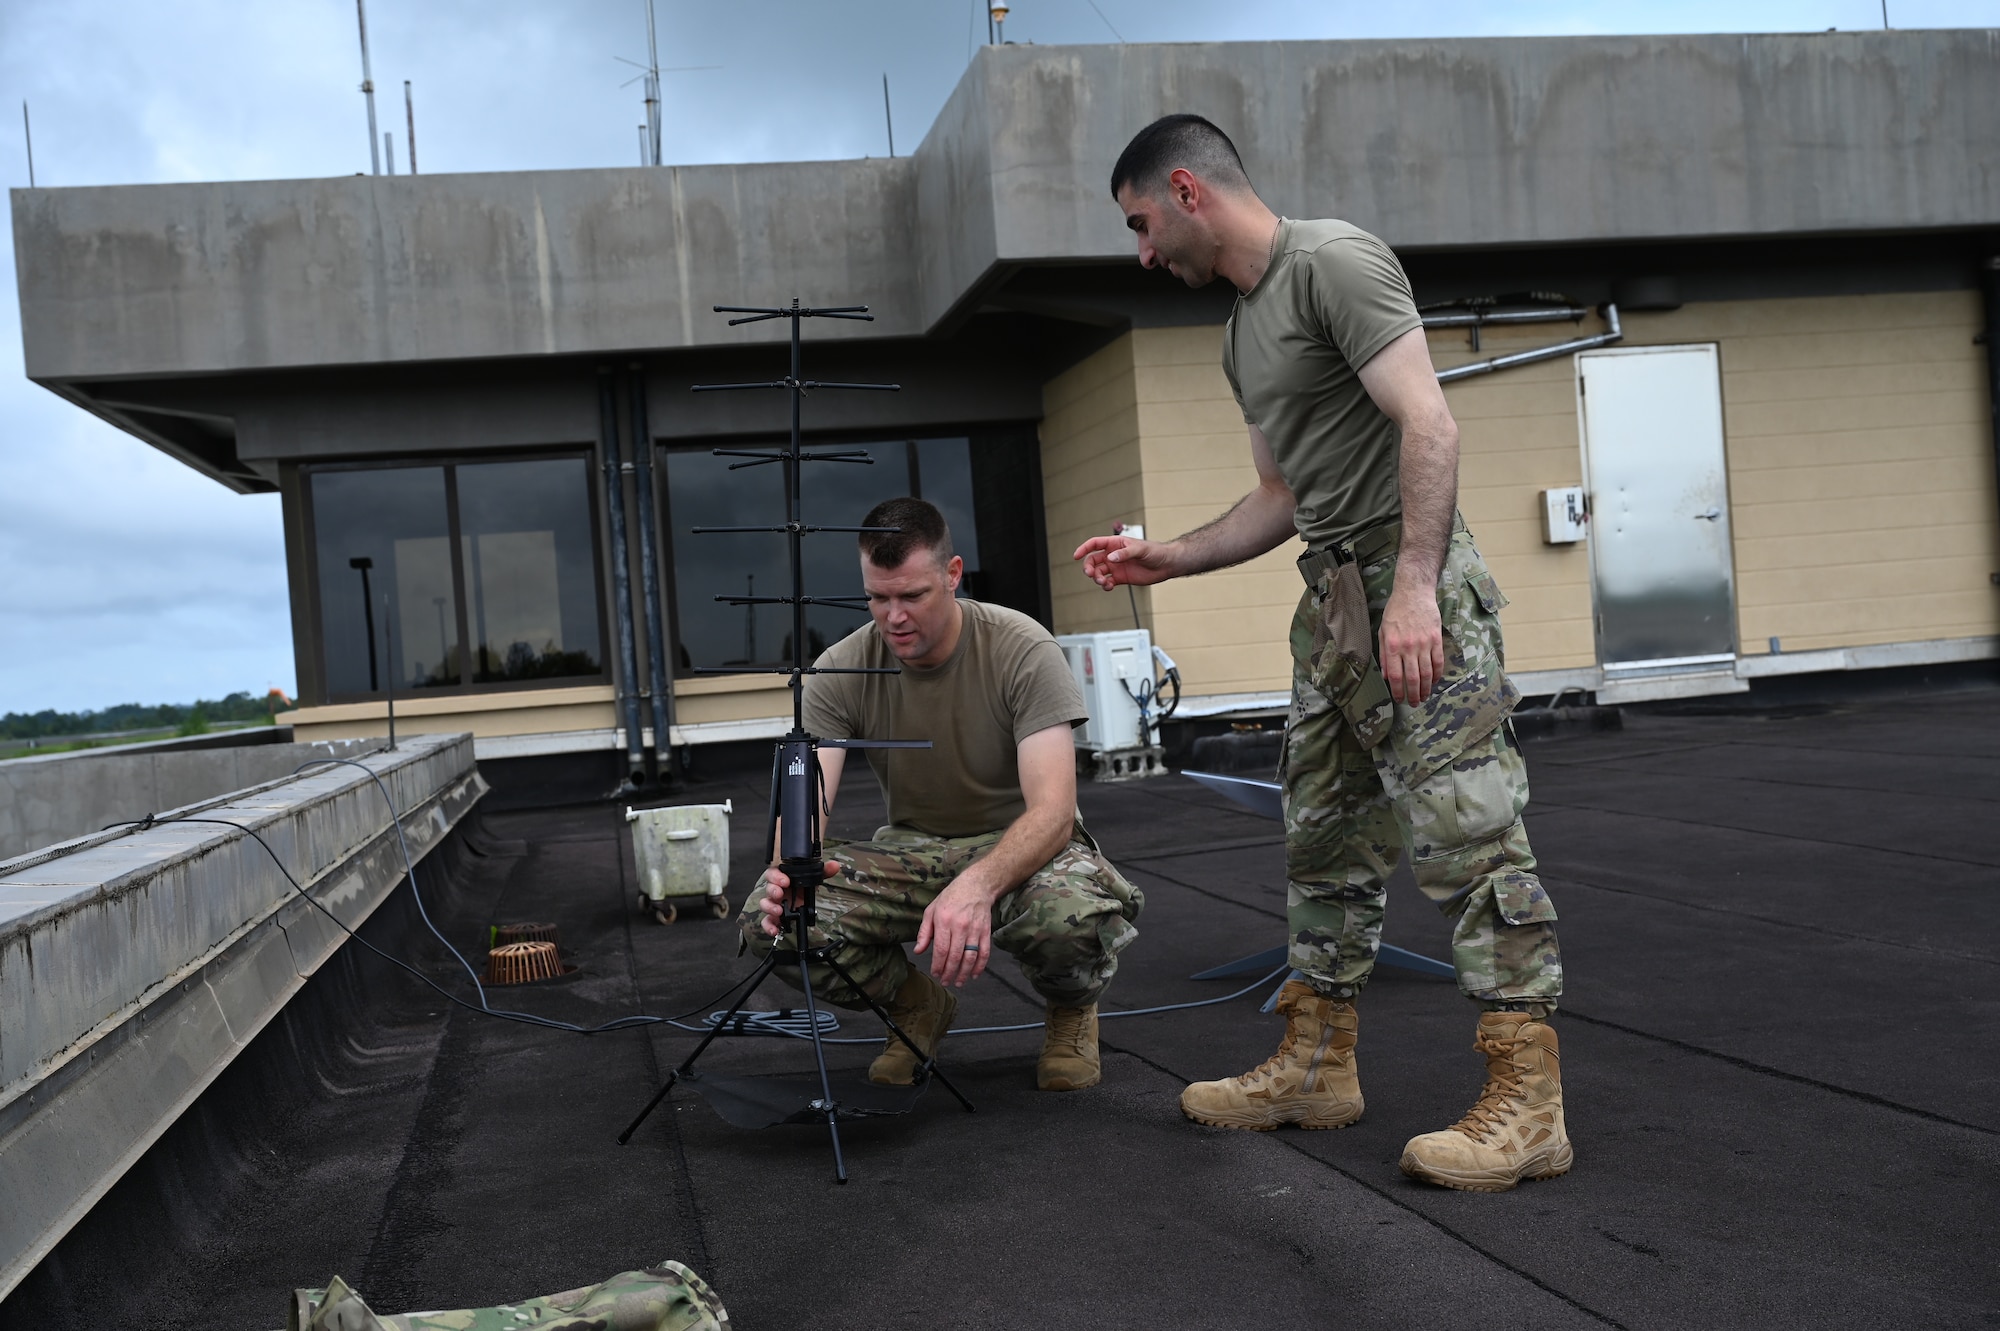 two men in military uniforms set up a communications antenna outside